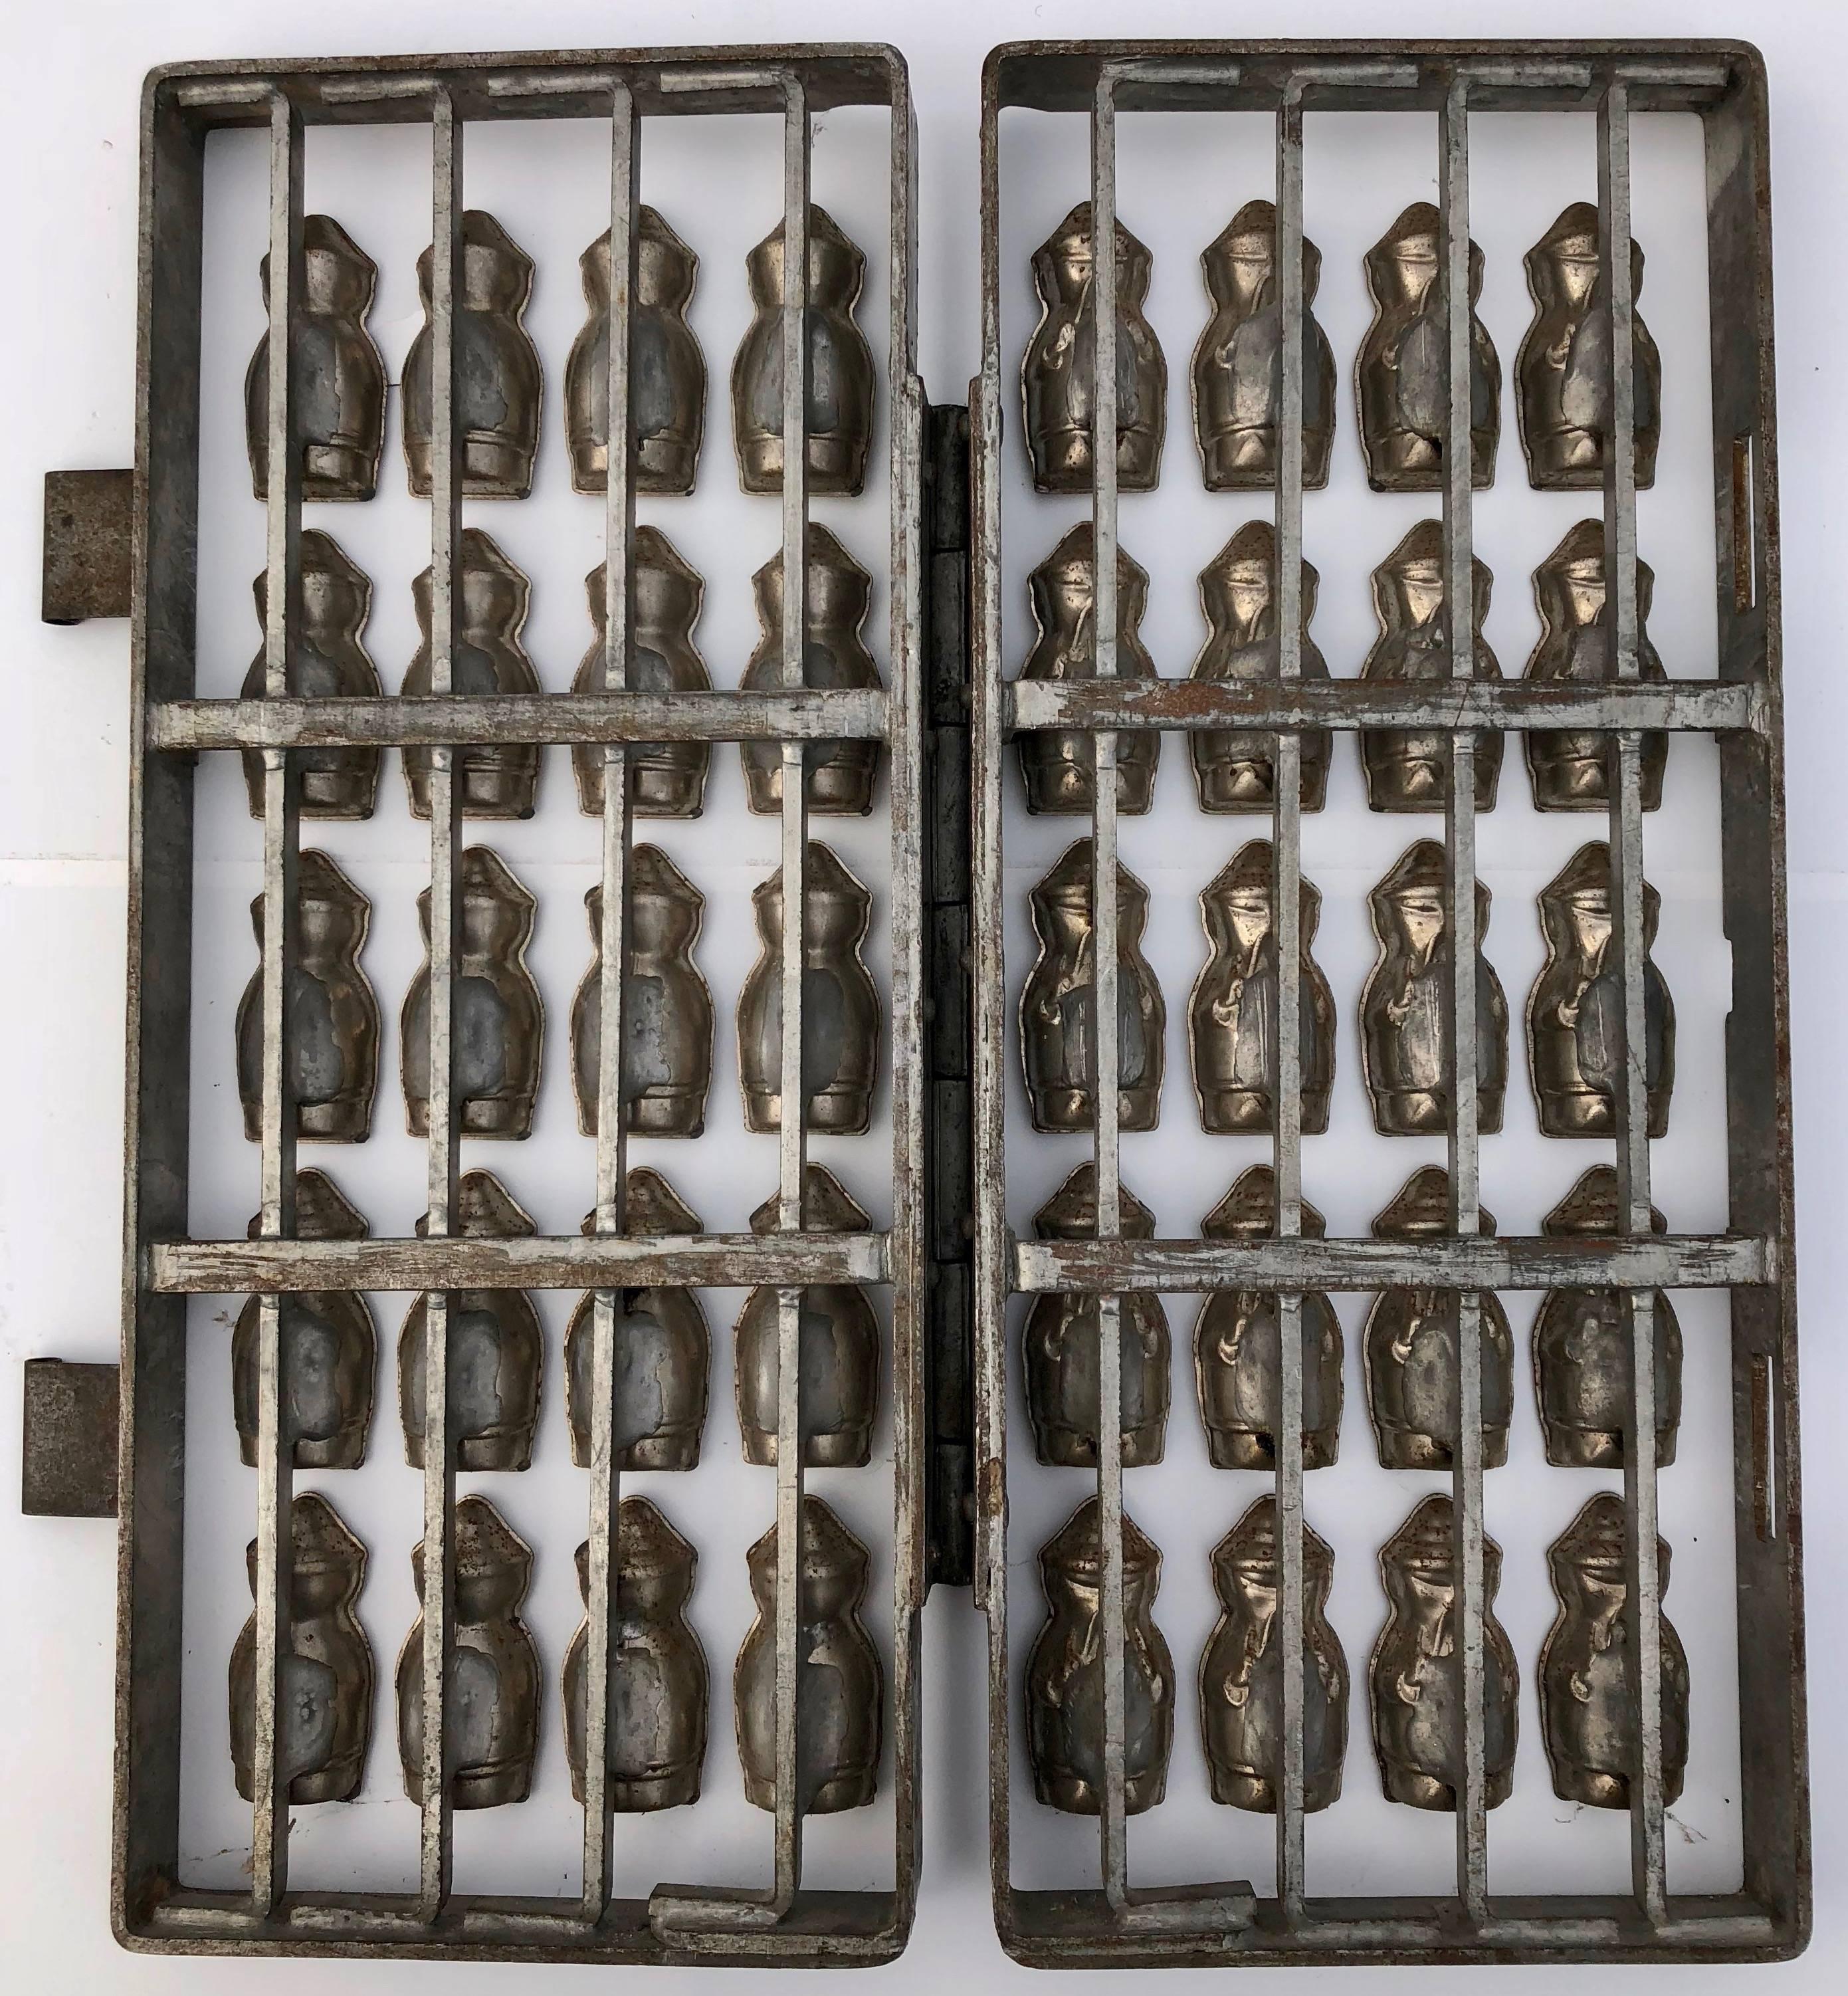 Other German Herman Walter Metal Chocolate Mold to Make 20 Little Figures For Sale